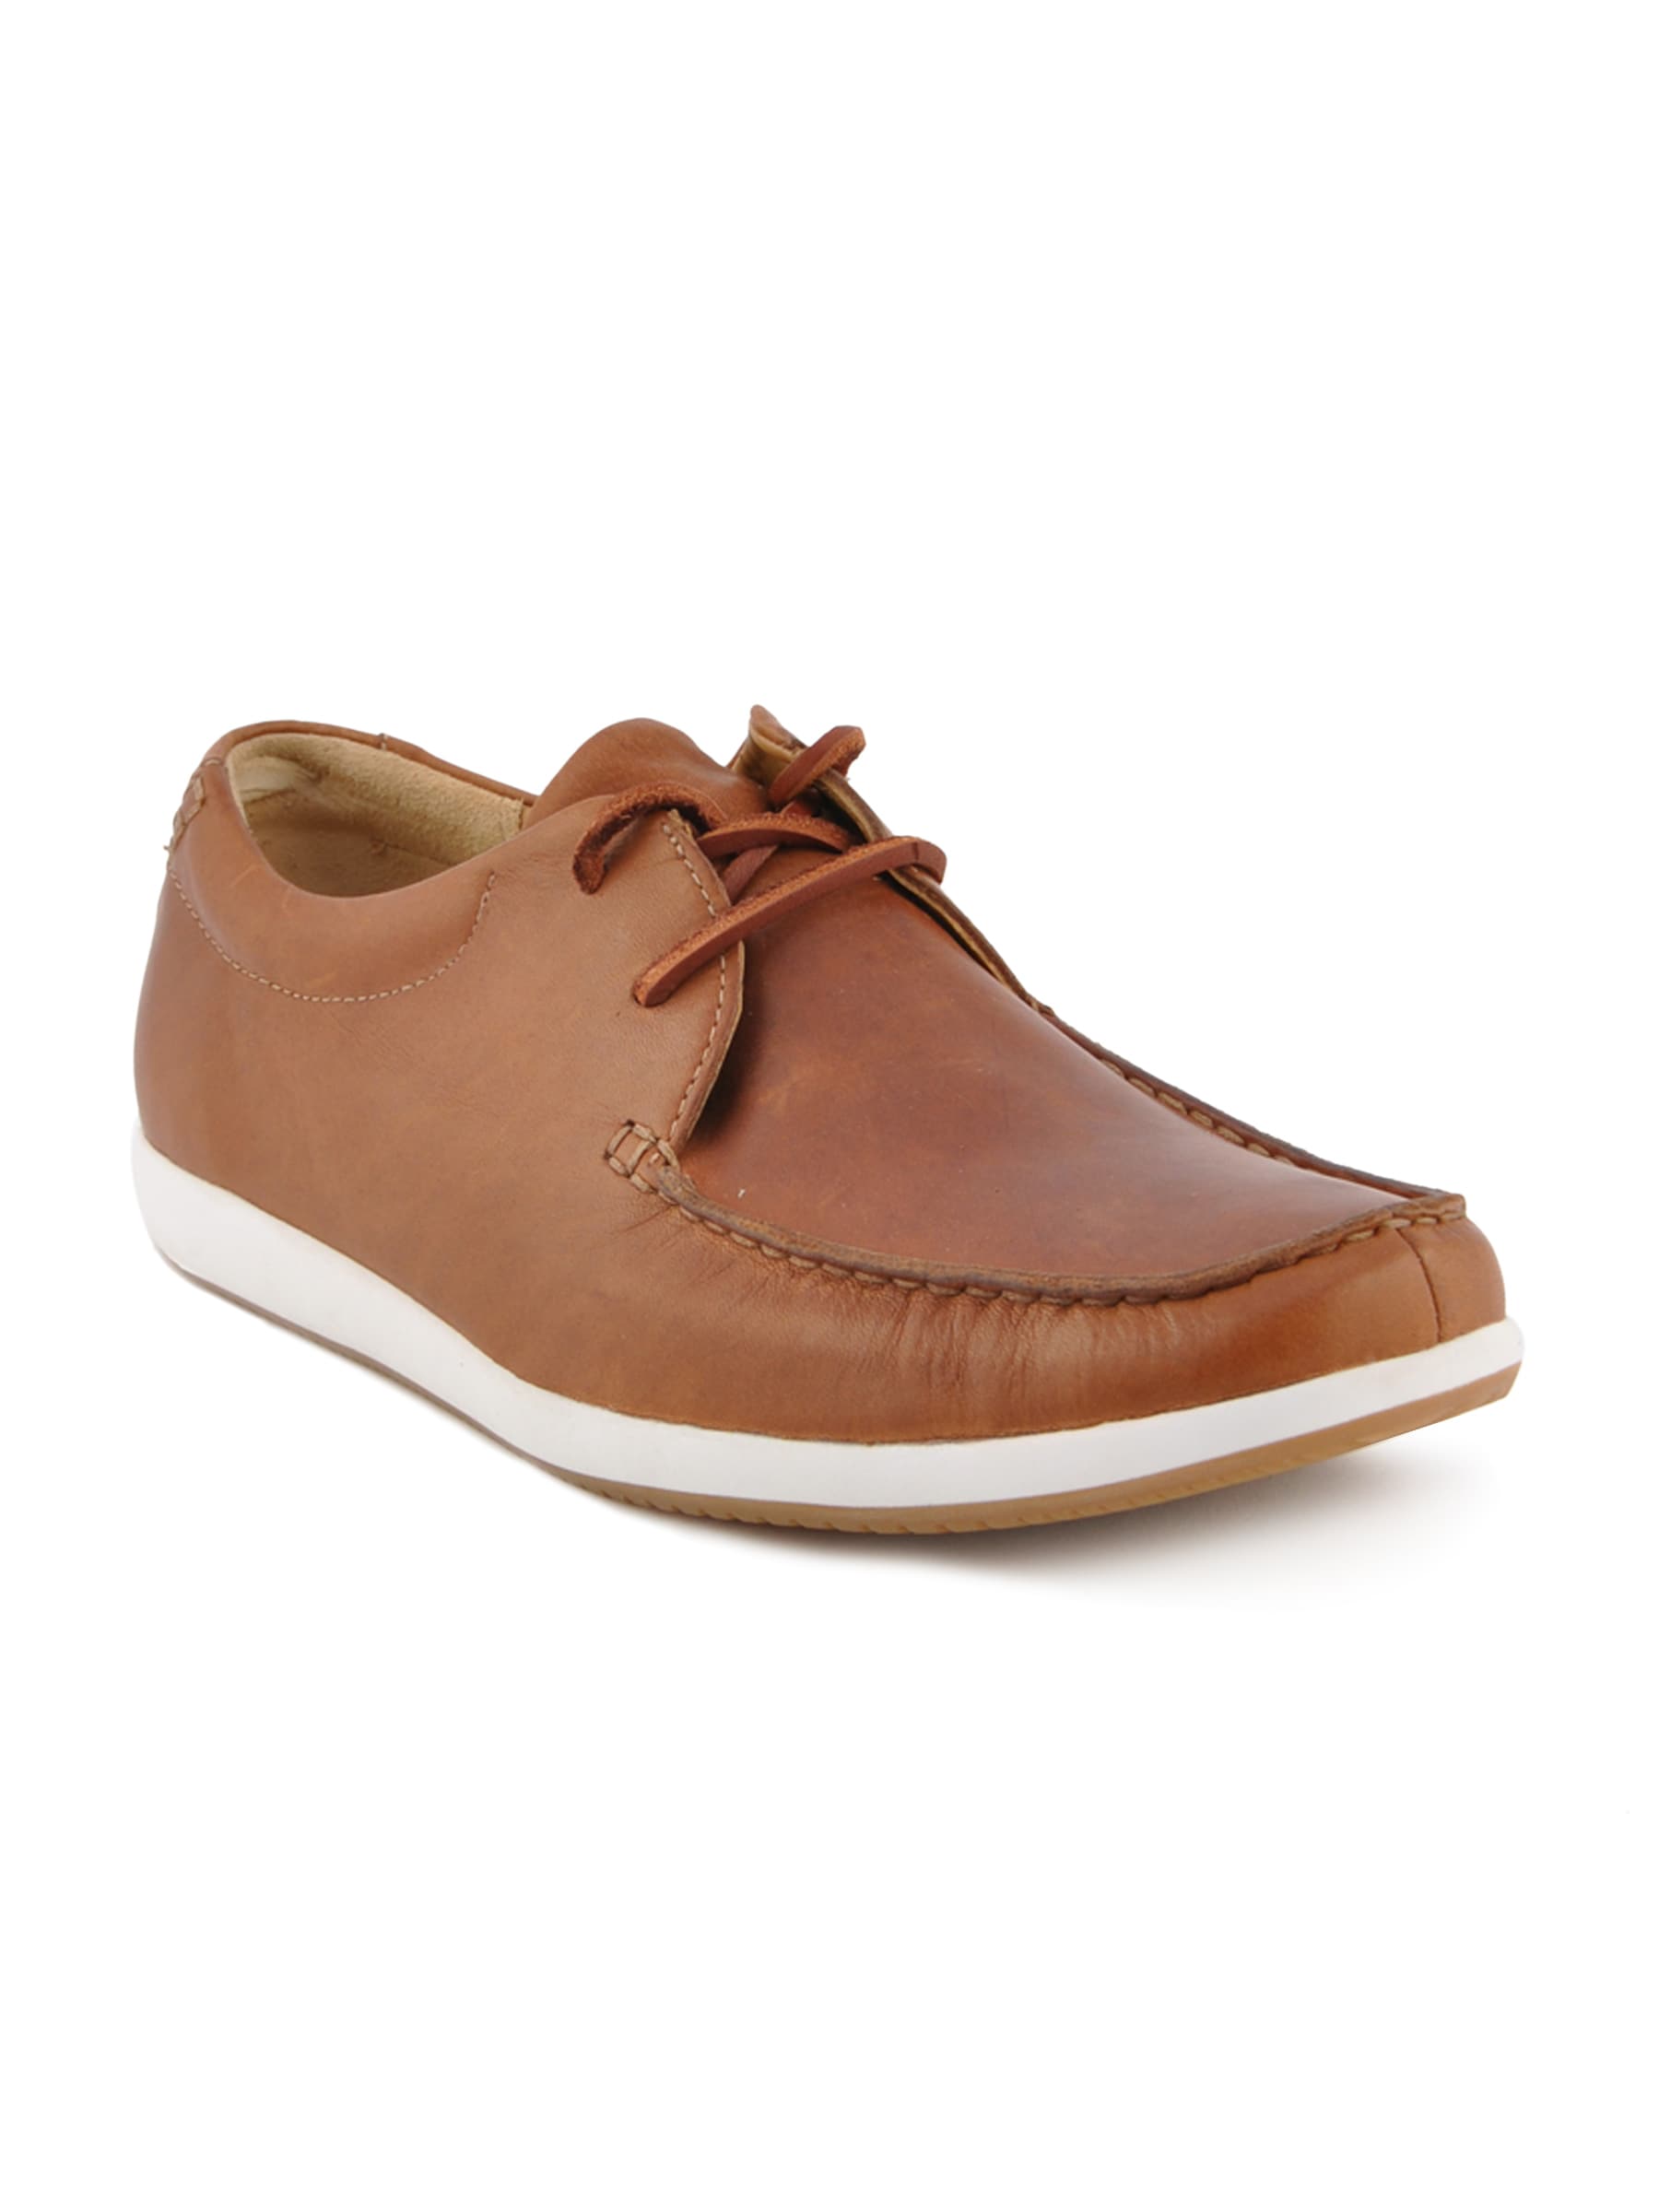 Clarks Men Brown Leather Casual Shoes